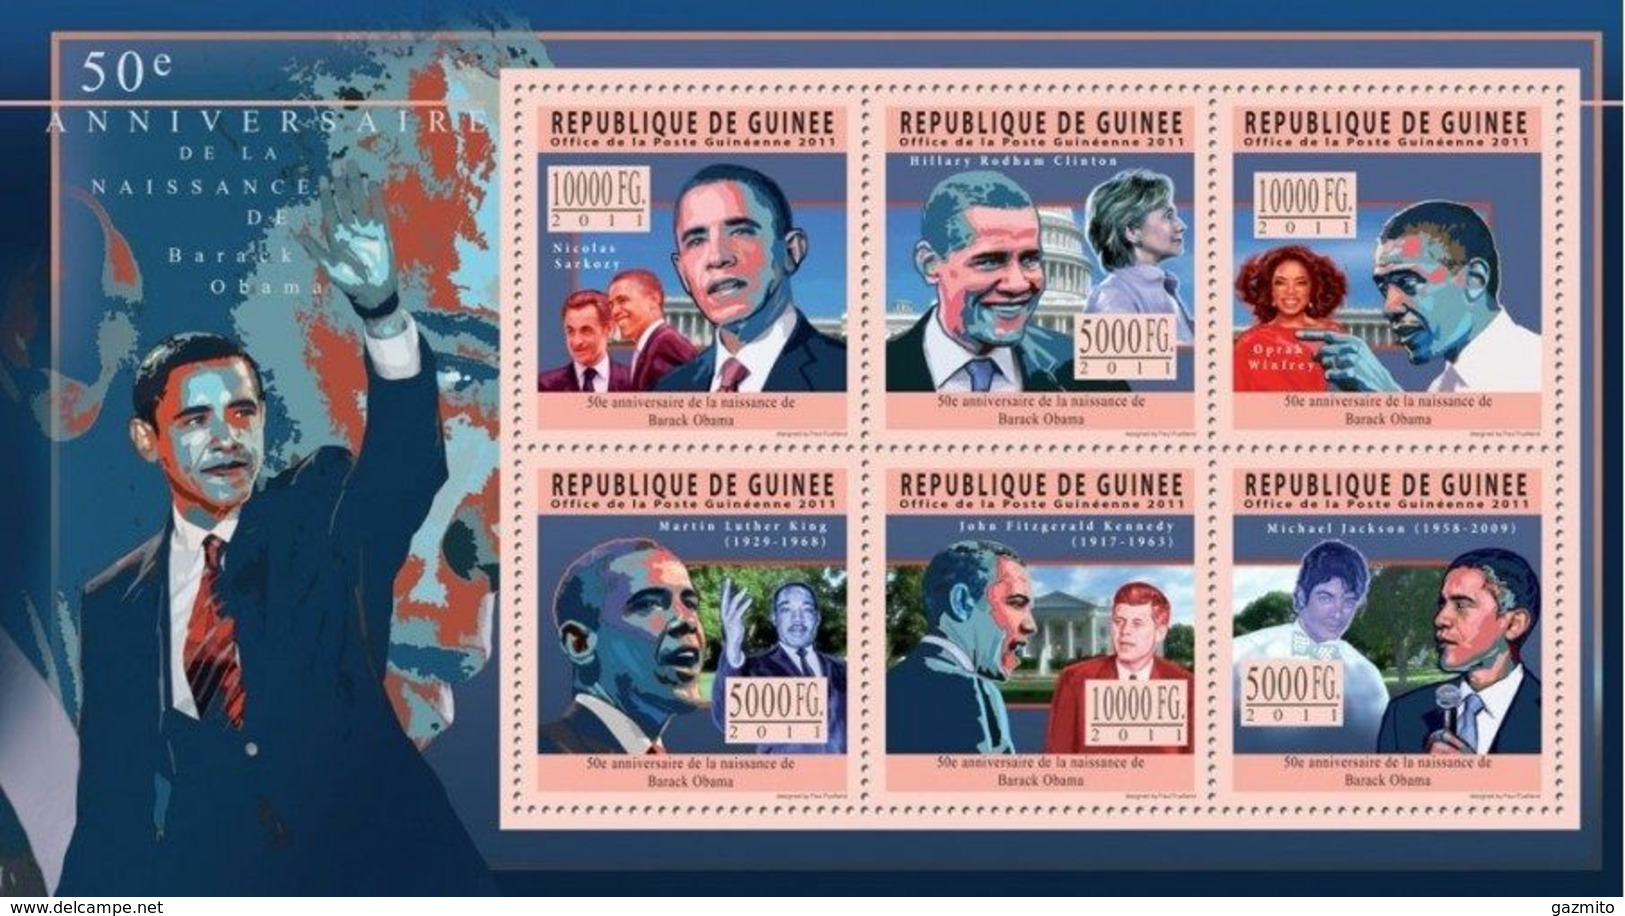 Guinea 2011, Obama, Kennedy, M. L. King, 6val In BF - Martin Luther King